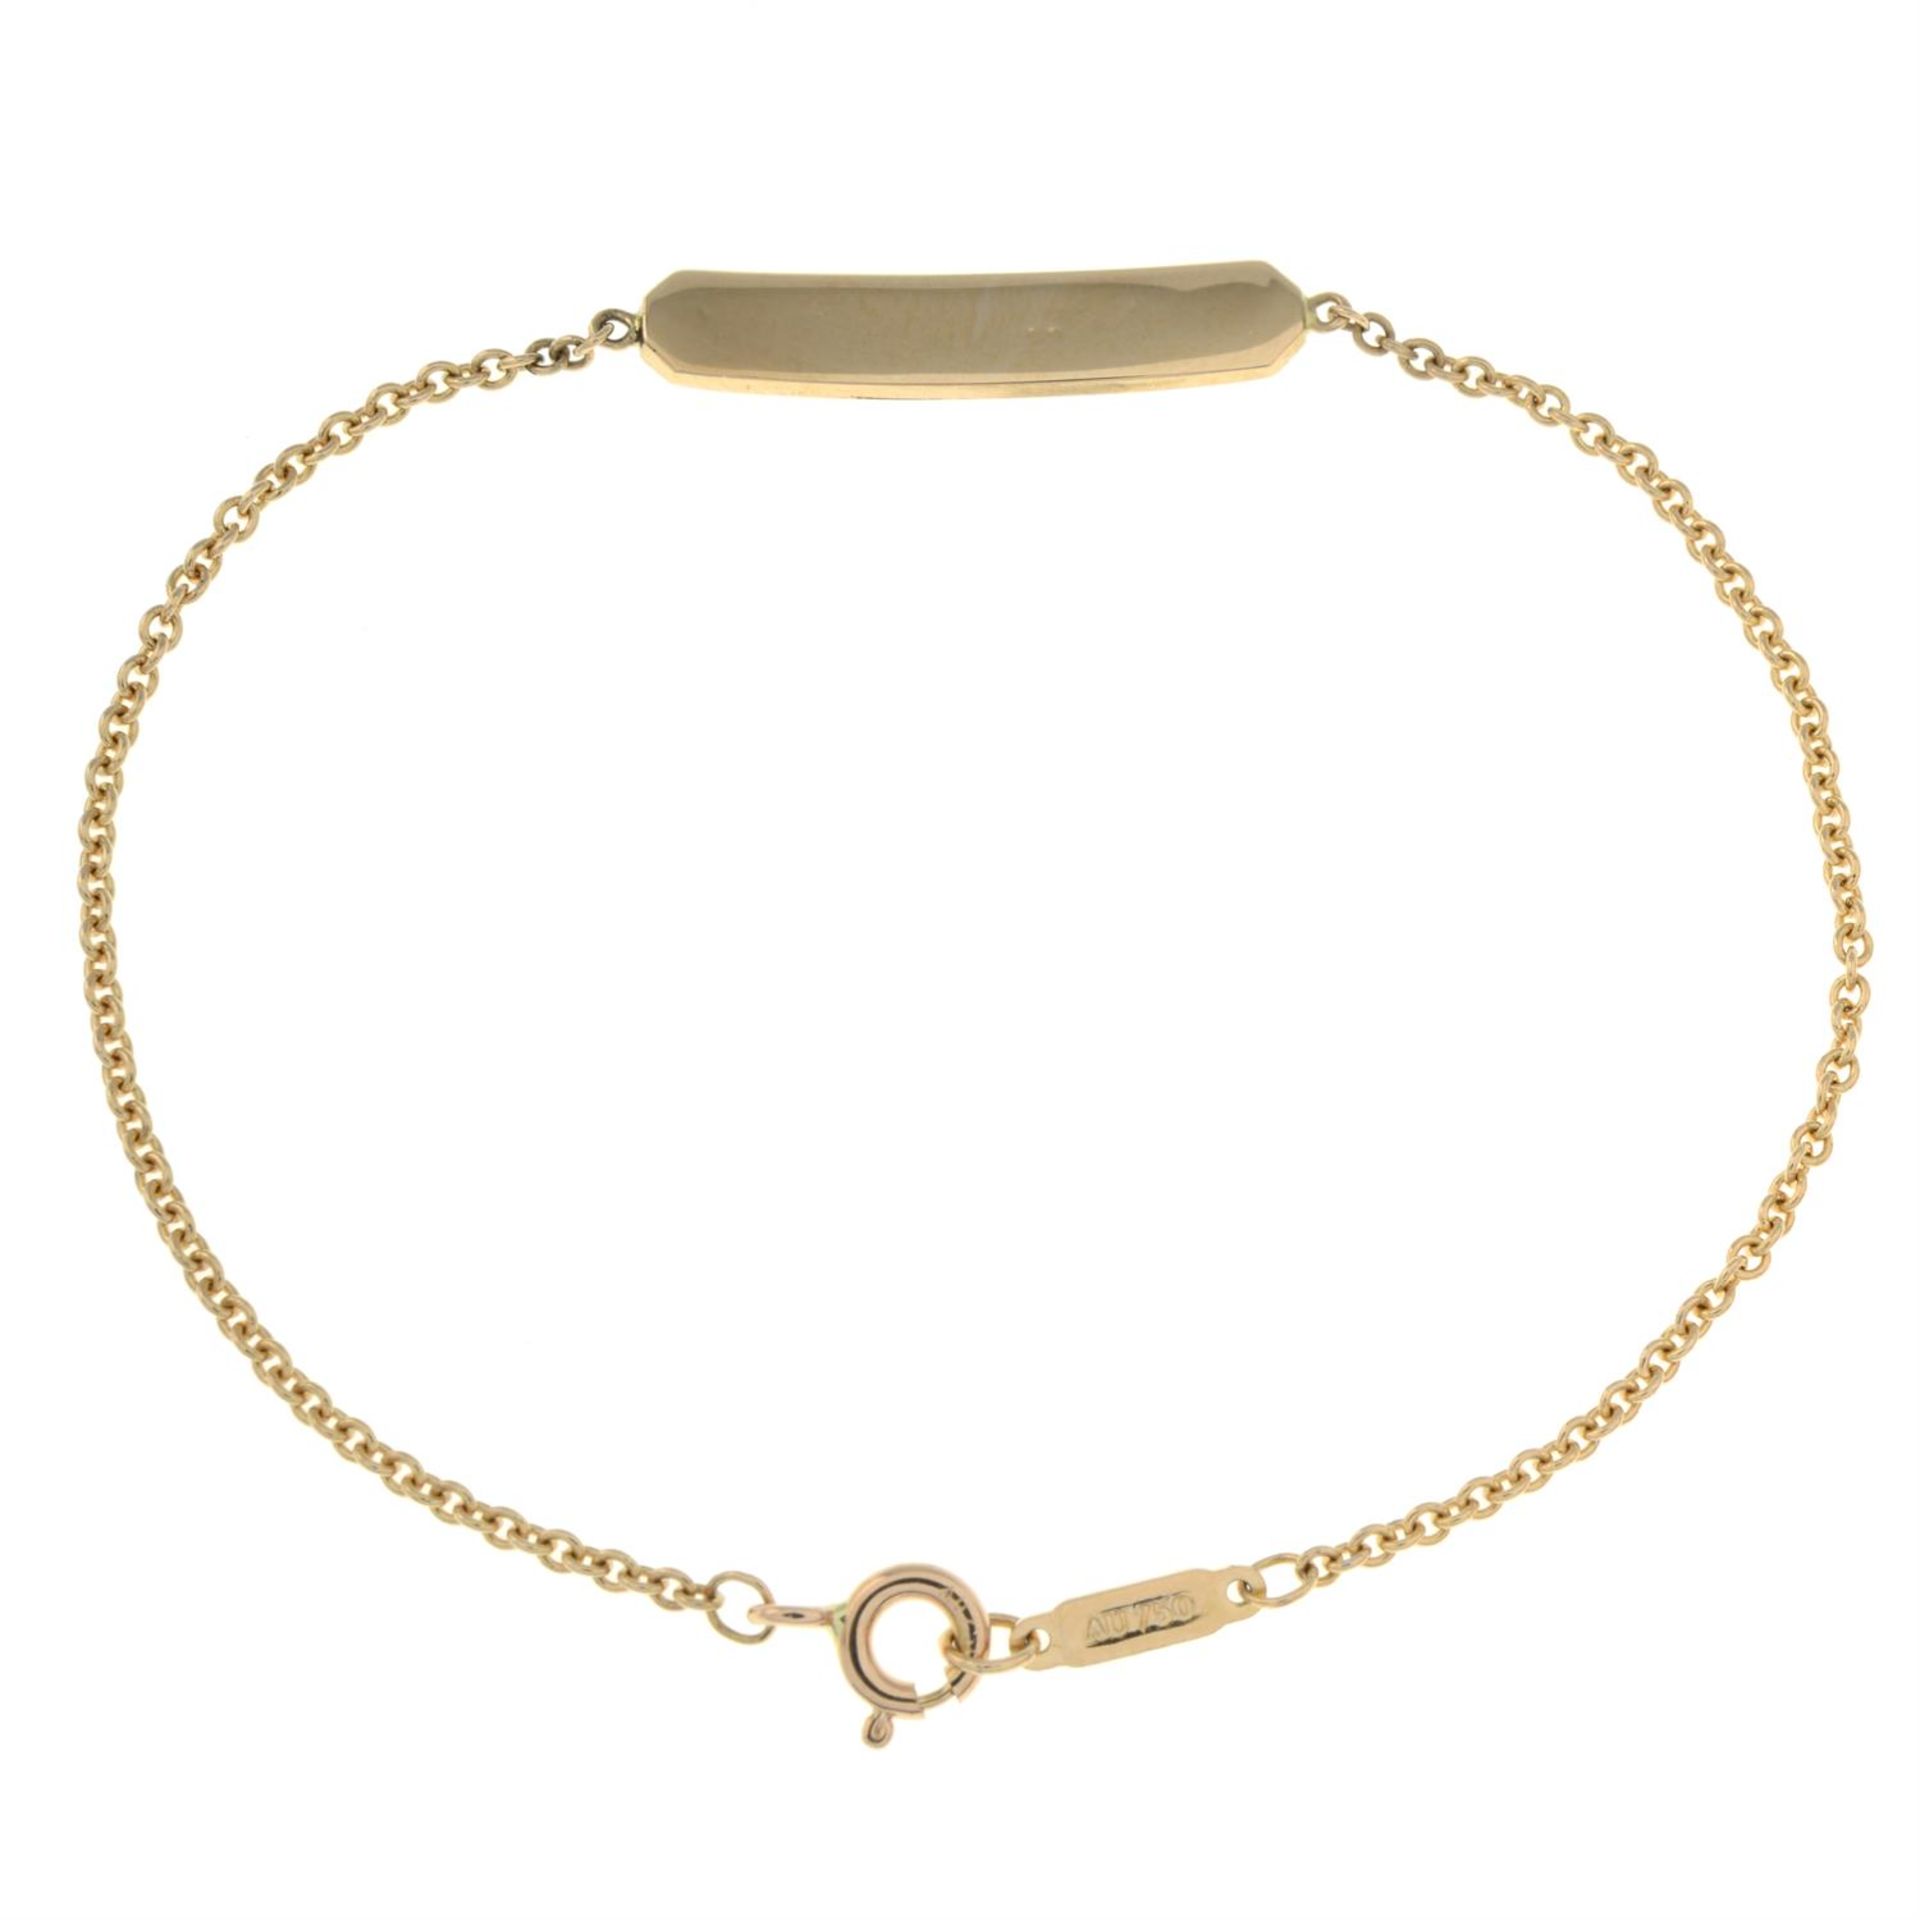 An ID trace-link bracelet, by Tiffany & Co. - Image 3 of 3